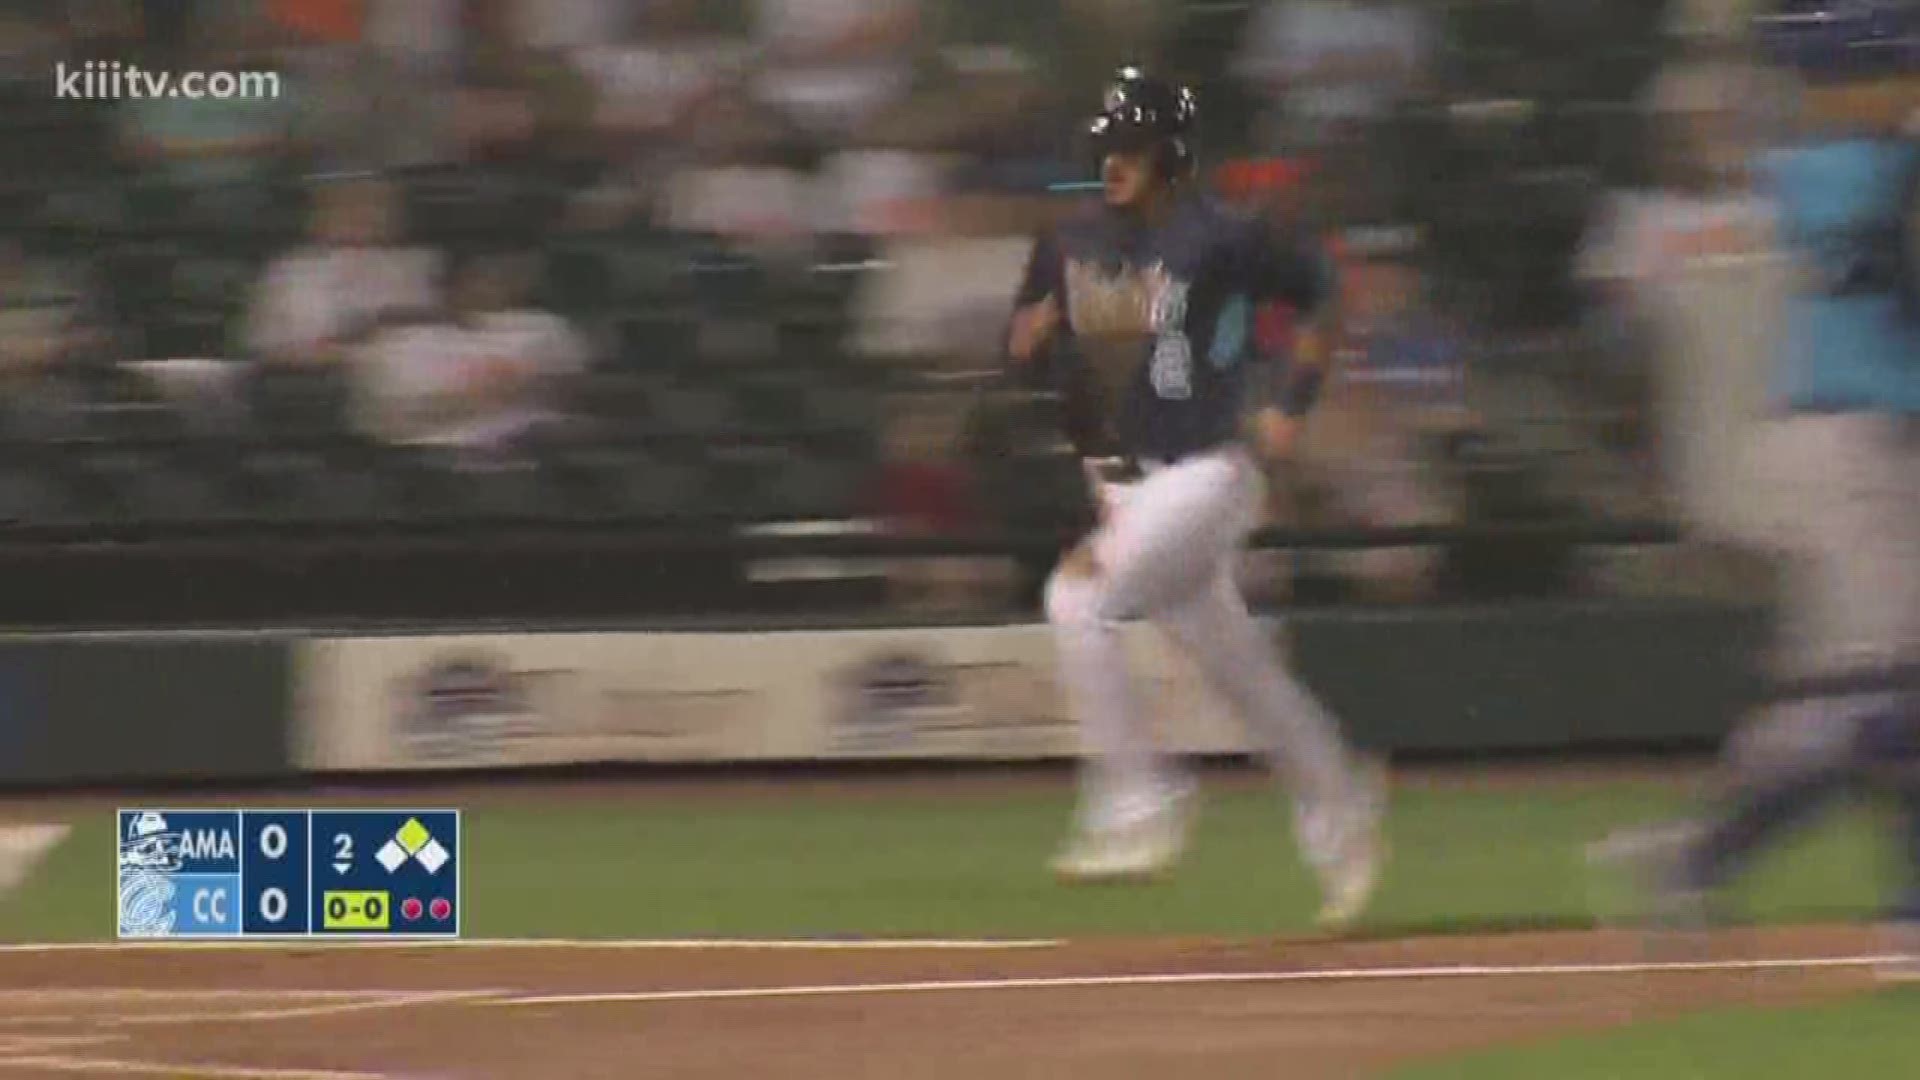 The Corpus Christi Hooks topped the Amarillo Sod Poodles in 10 innings 2-1.